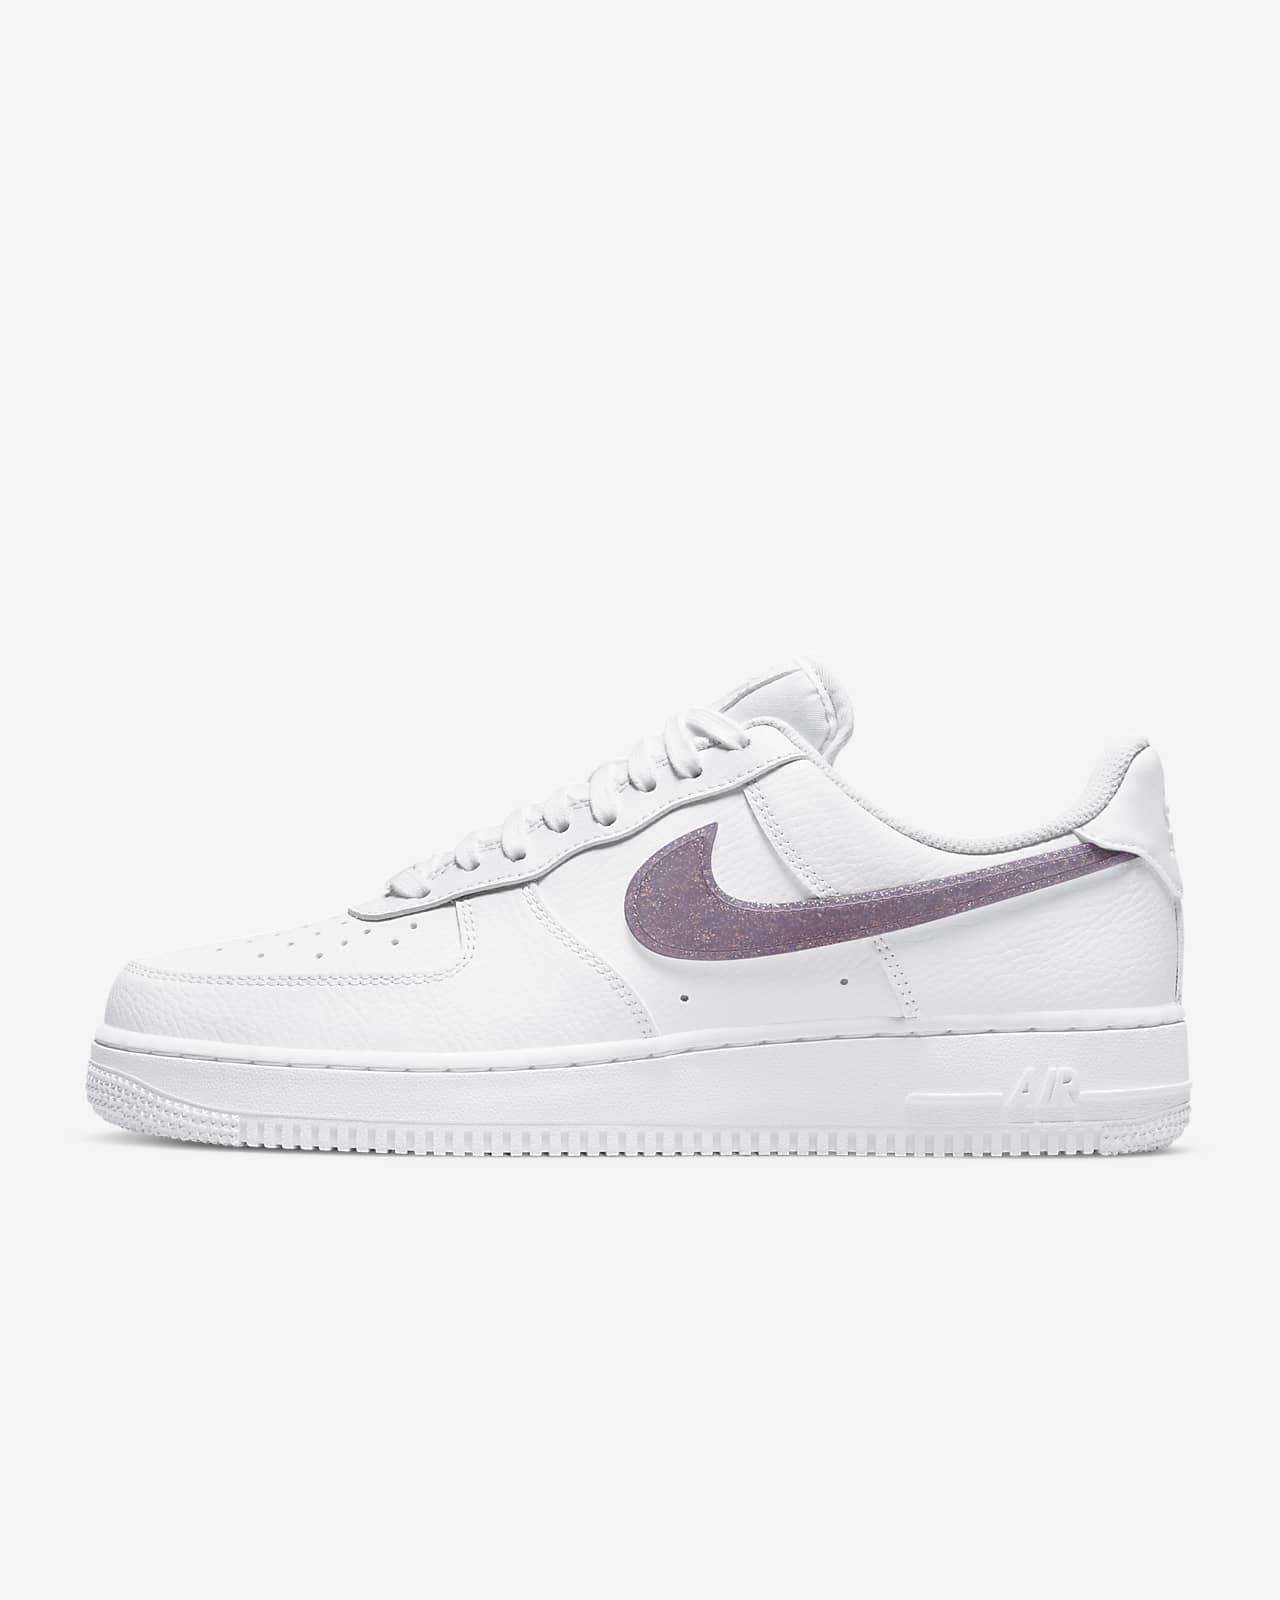 Nike Air Force 1 '07 Essential Women's Shoes بوت كات